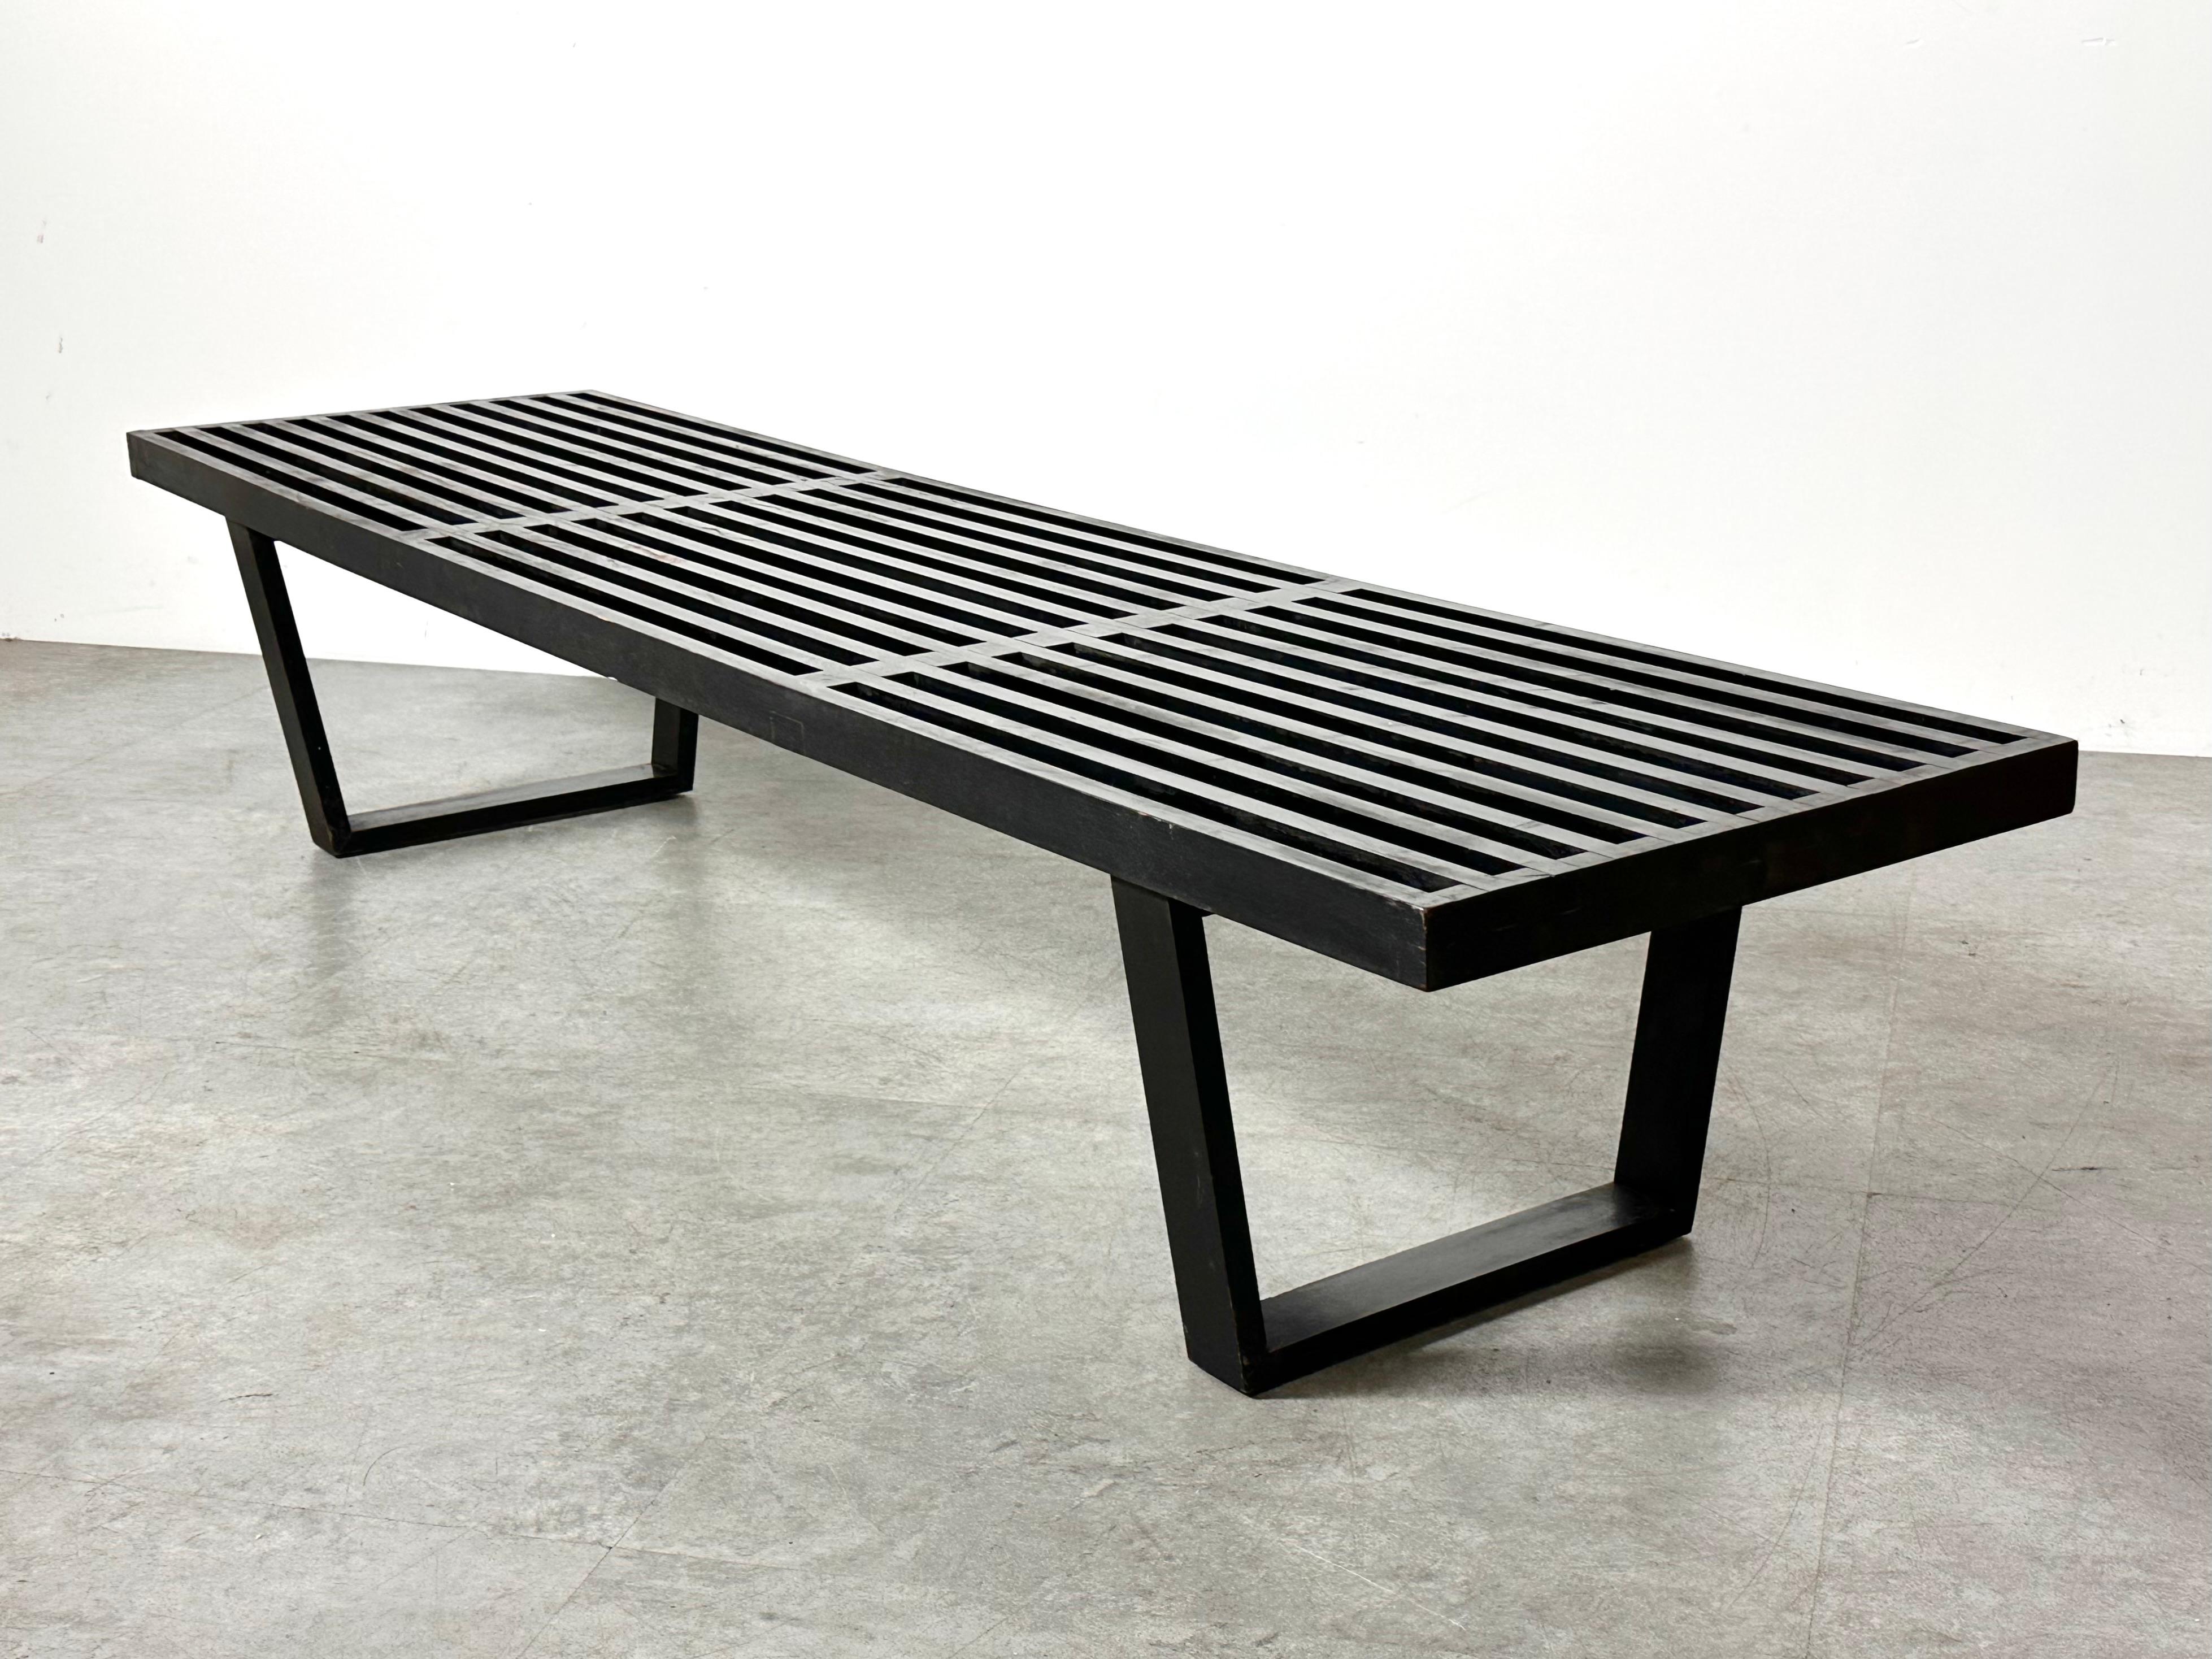 Vintage early production slat platform bench or coffee table designed by George Nelson for Herman Miller in 1945
Original black finish with preserved paper label intact to underside

A great example of this iconic design circa late 1940s to early